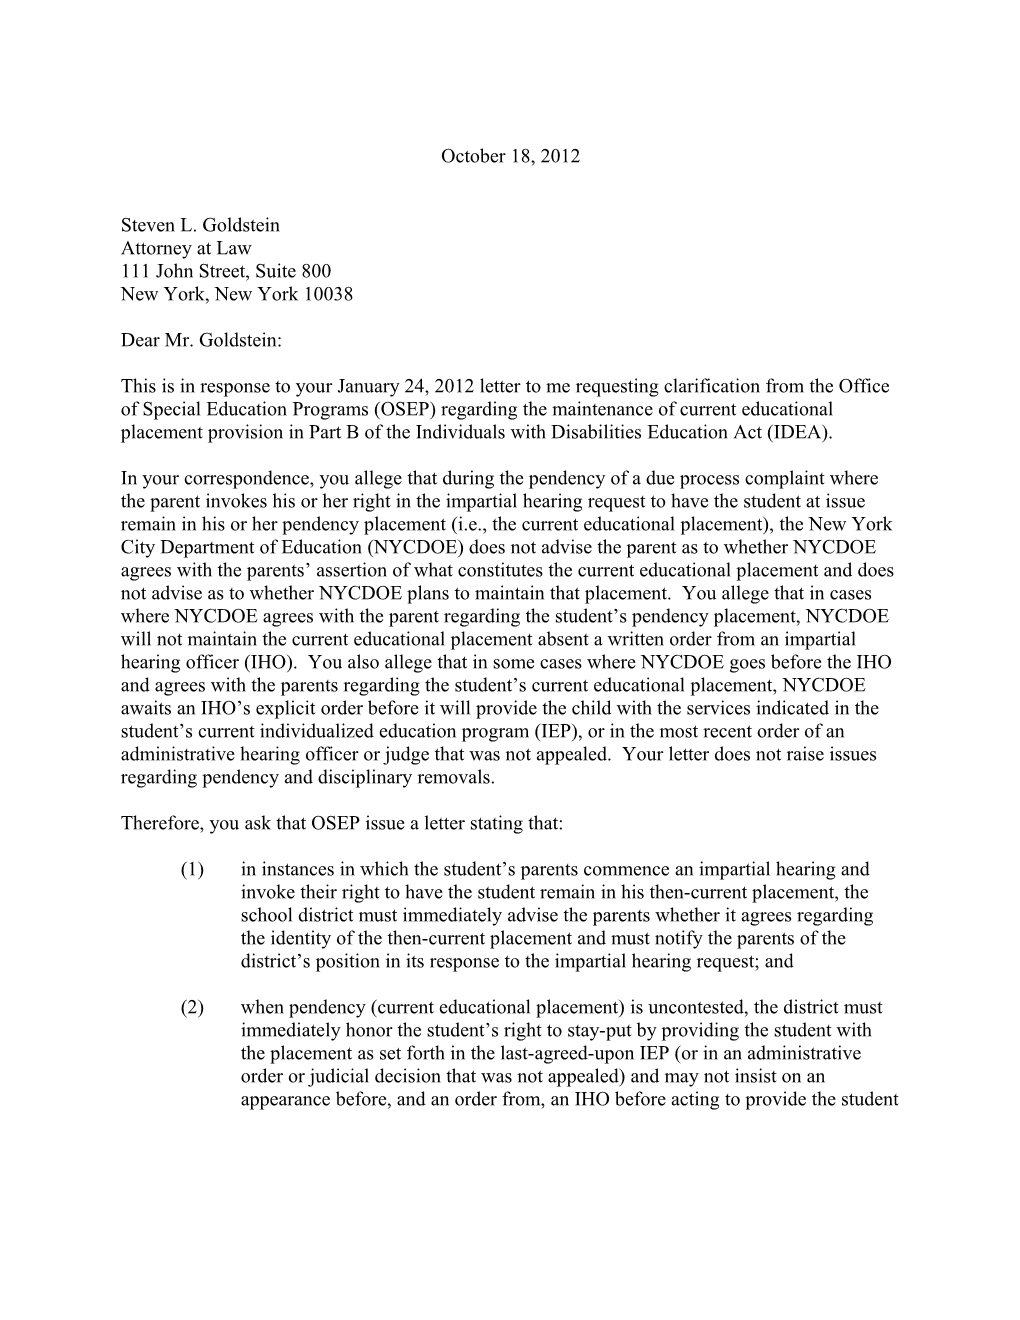 Policy Letter to Goldstein 10-18-12